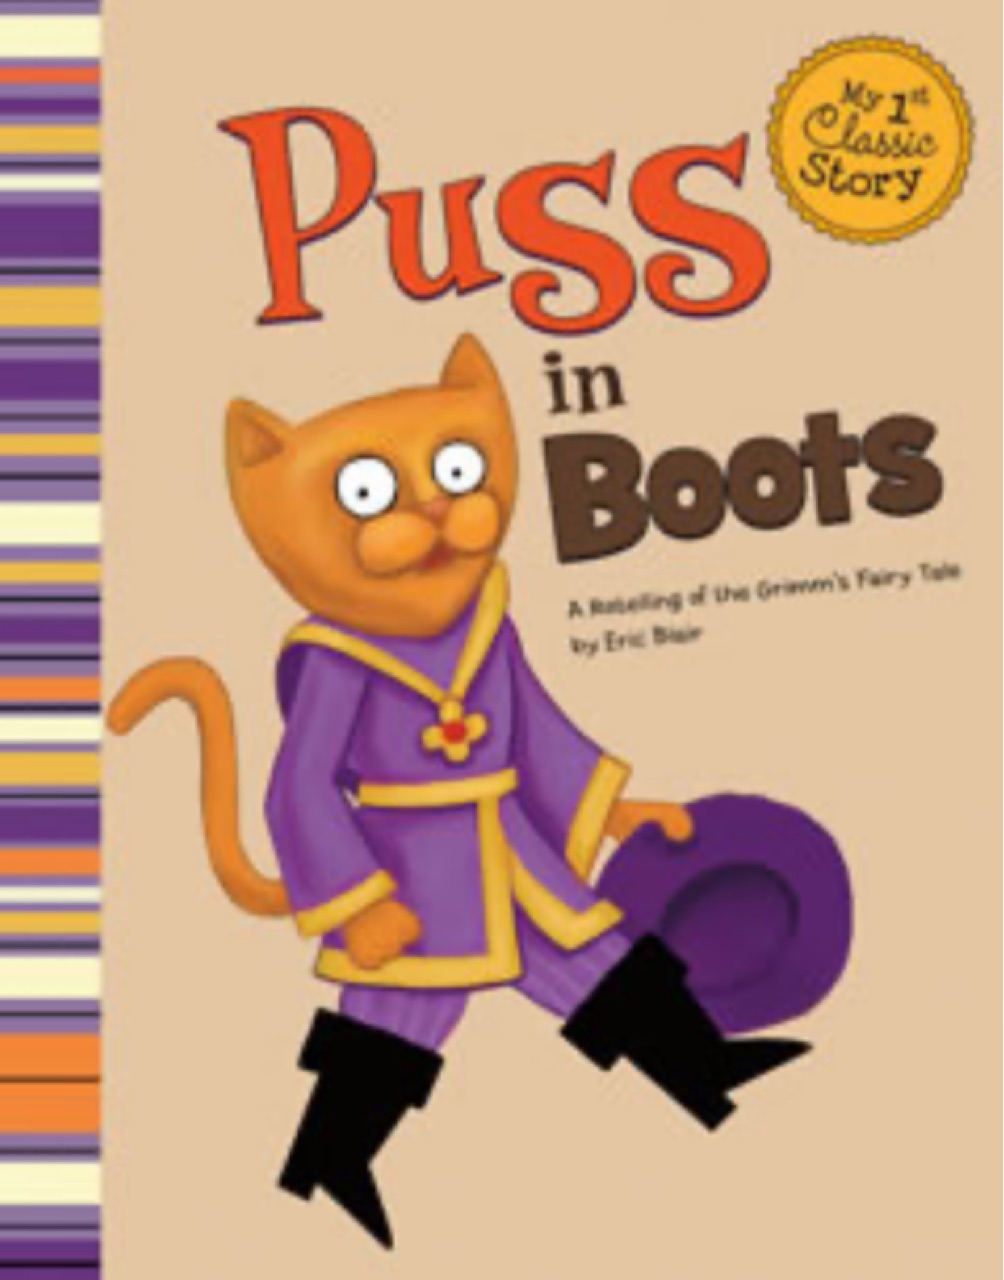 Puss in Boots: A Retelling of the Grimm's Fairy Tale (My First Classic Story)